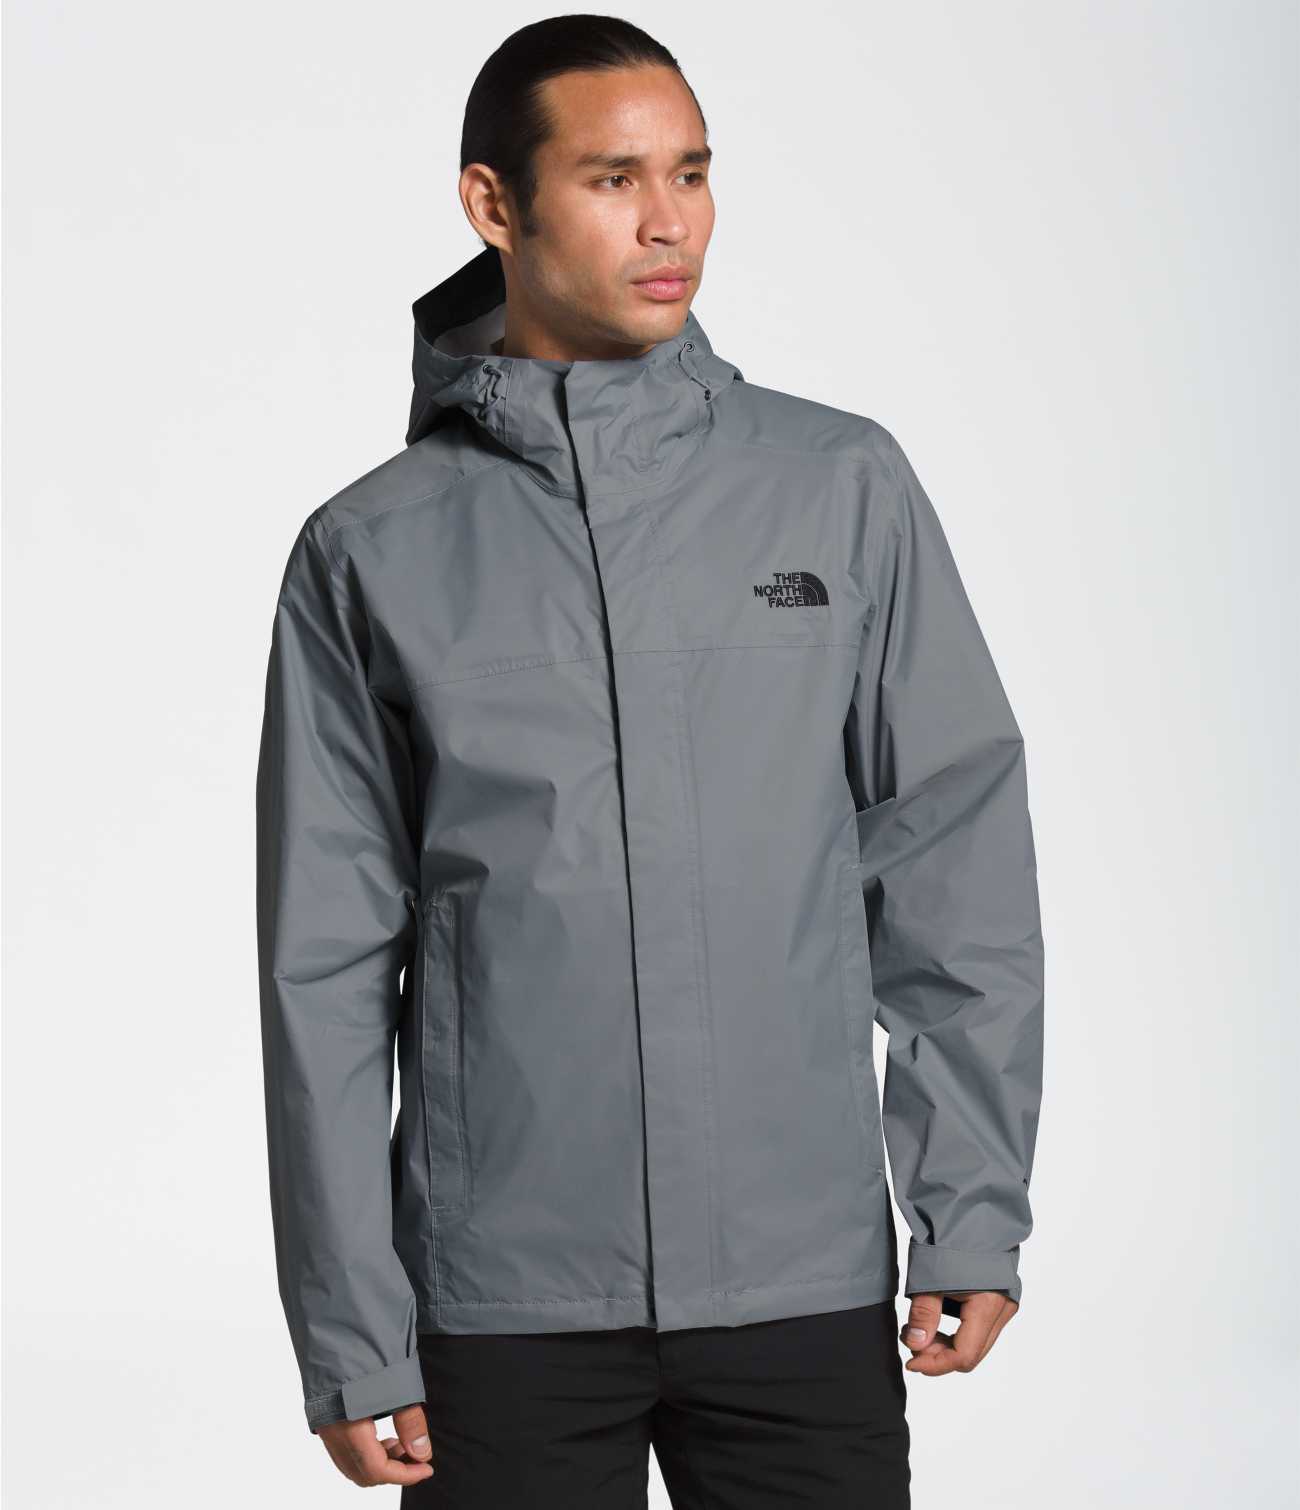 MEN'S VENTURE 2 JACKET | The North Face | The North Face Renewed